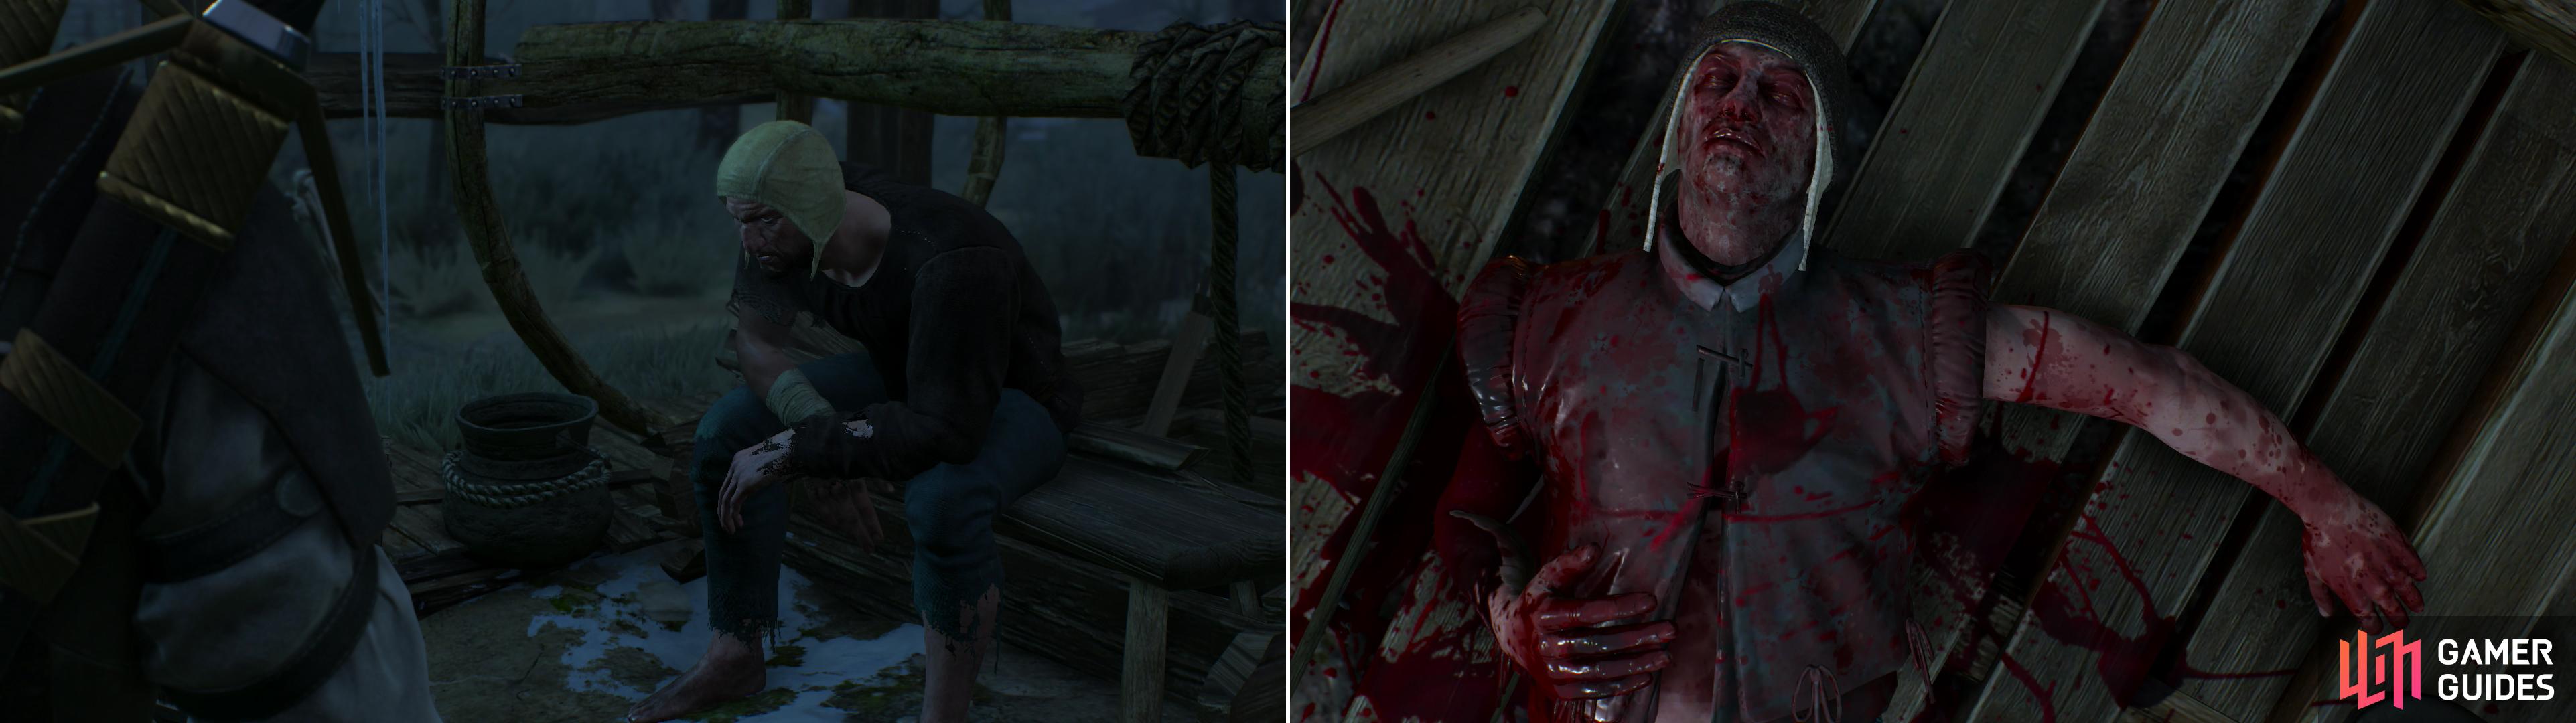 The sole survivor of the attack at Heatherton is understandly shaken (left). The Nilfgaardian spy wasn’t kindly treated by the Wild Hunt (right).